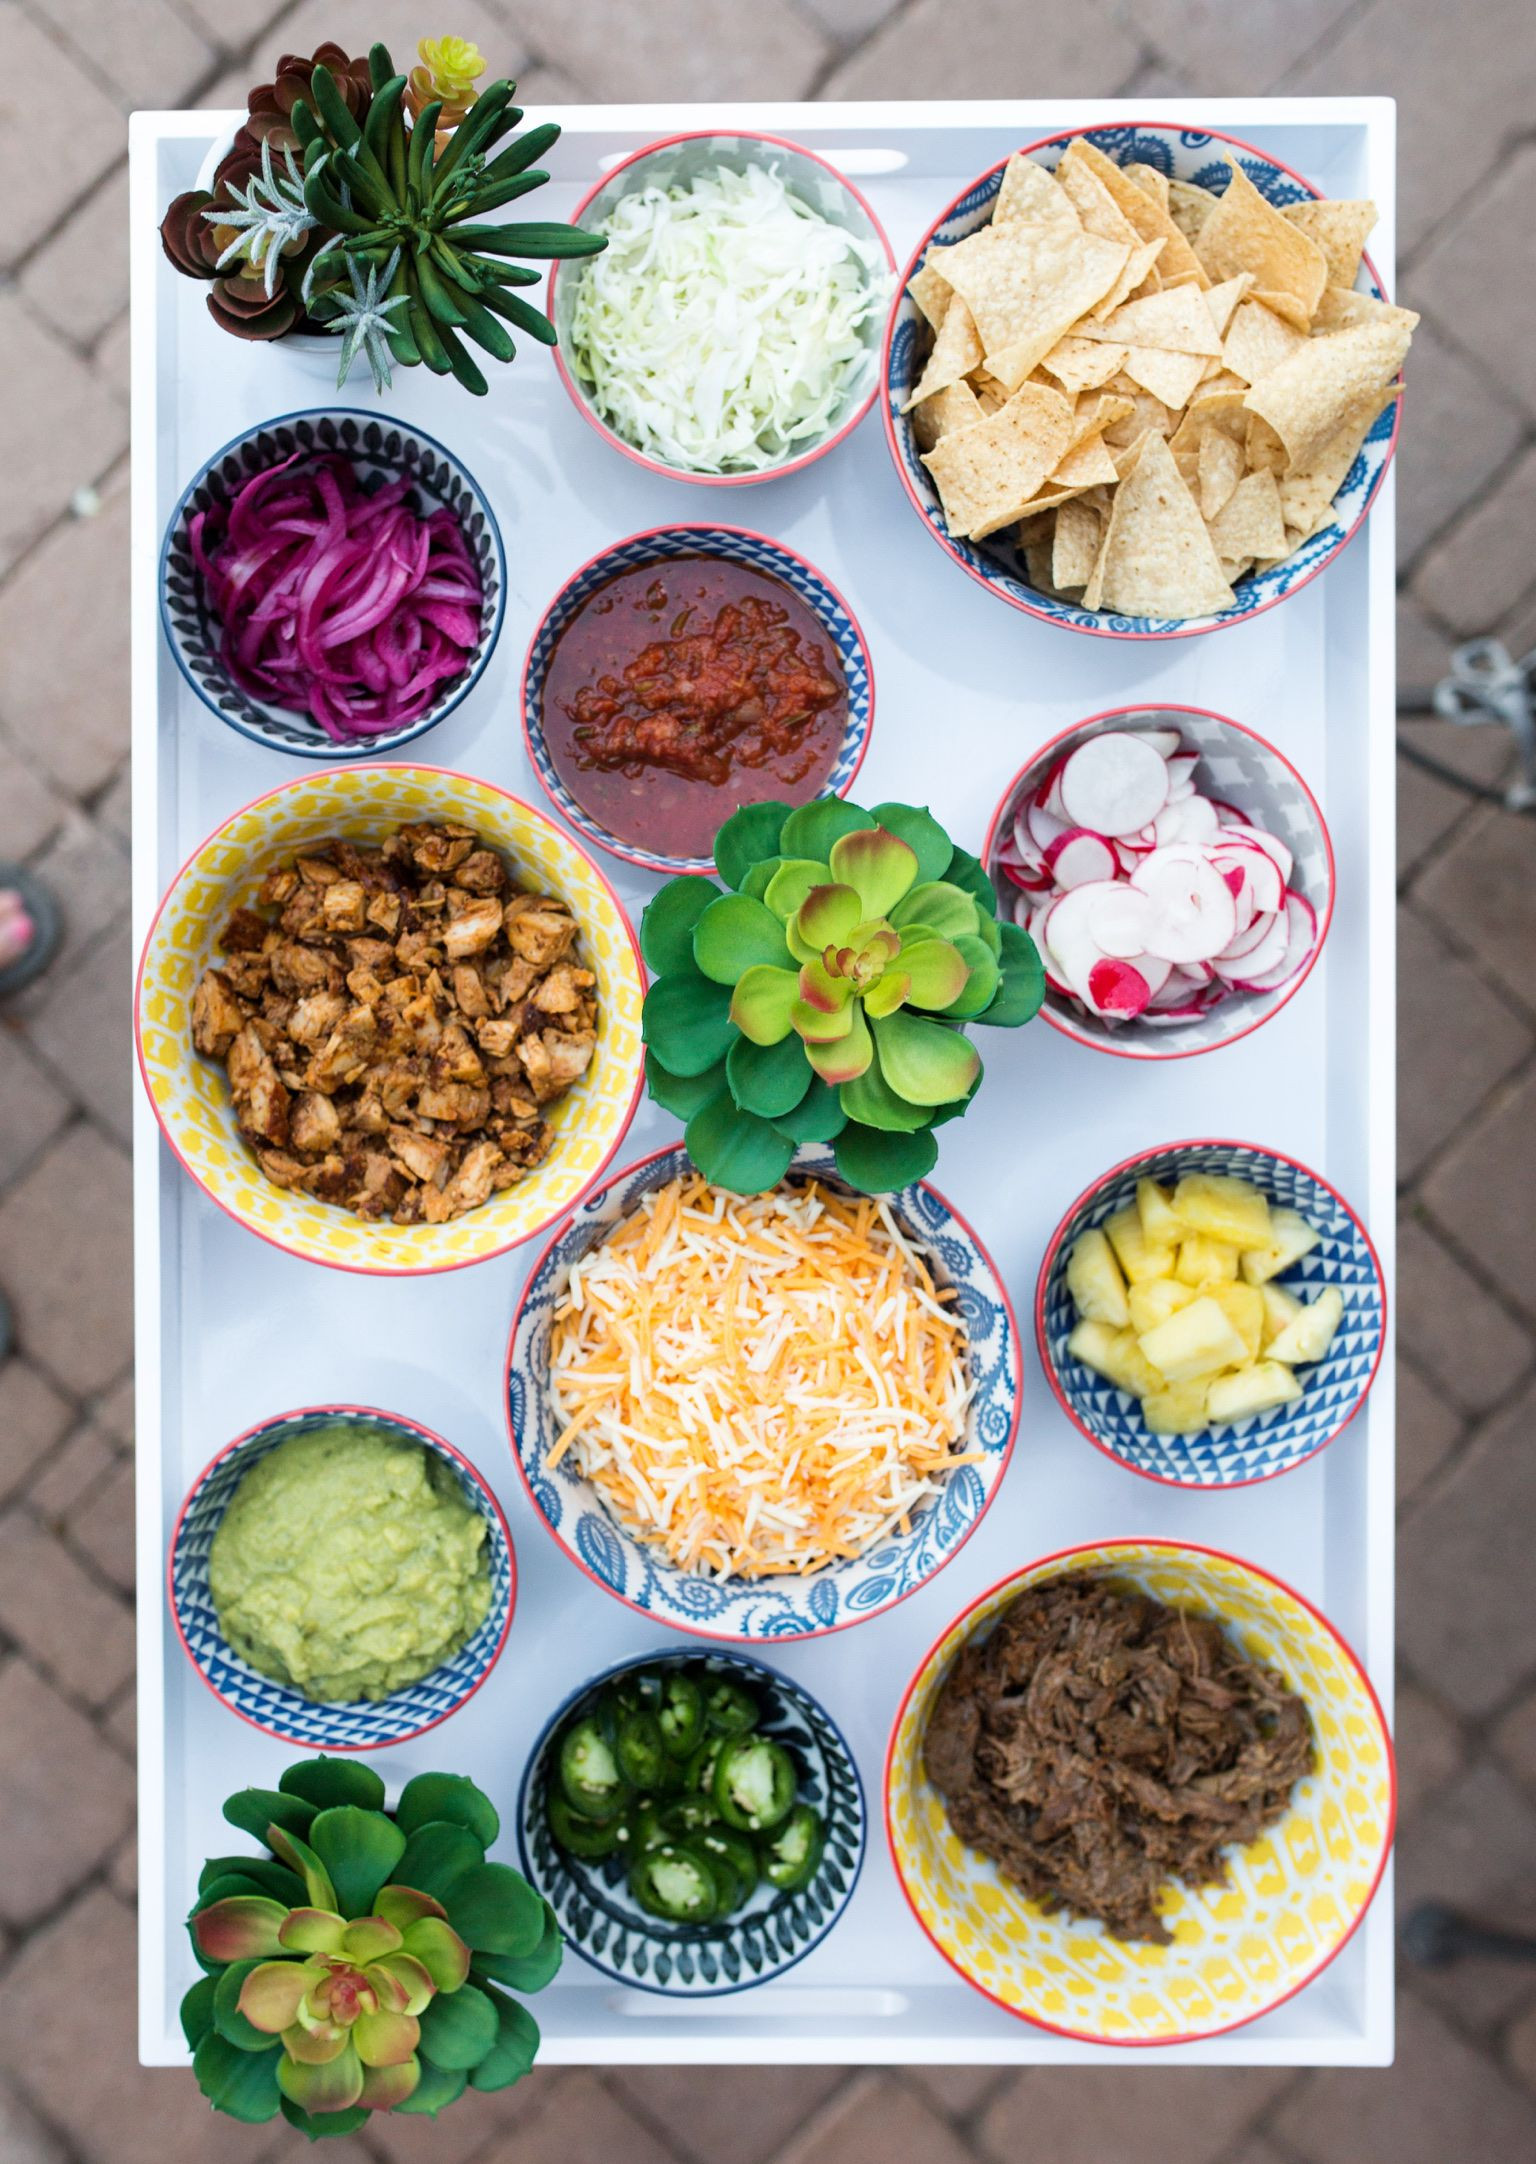 Taco Dinner Party Ideas
 How to Create Individual Taco Bar Trays for Your Next